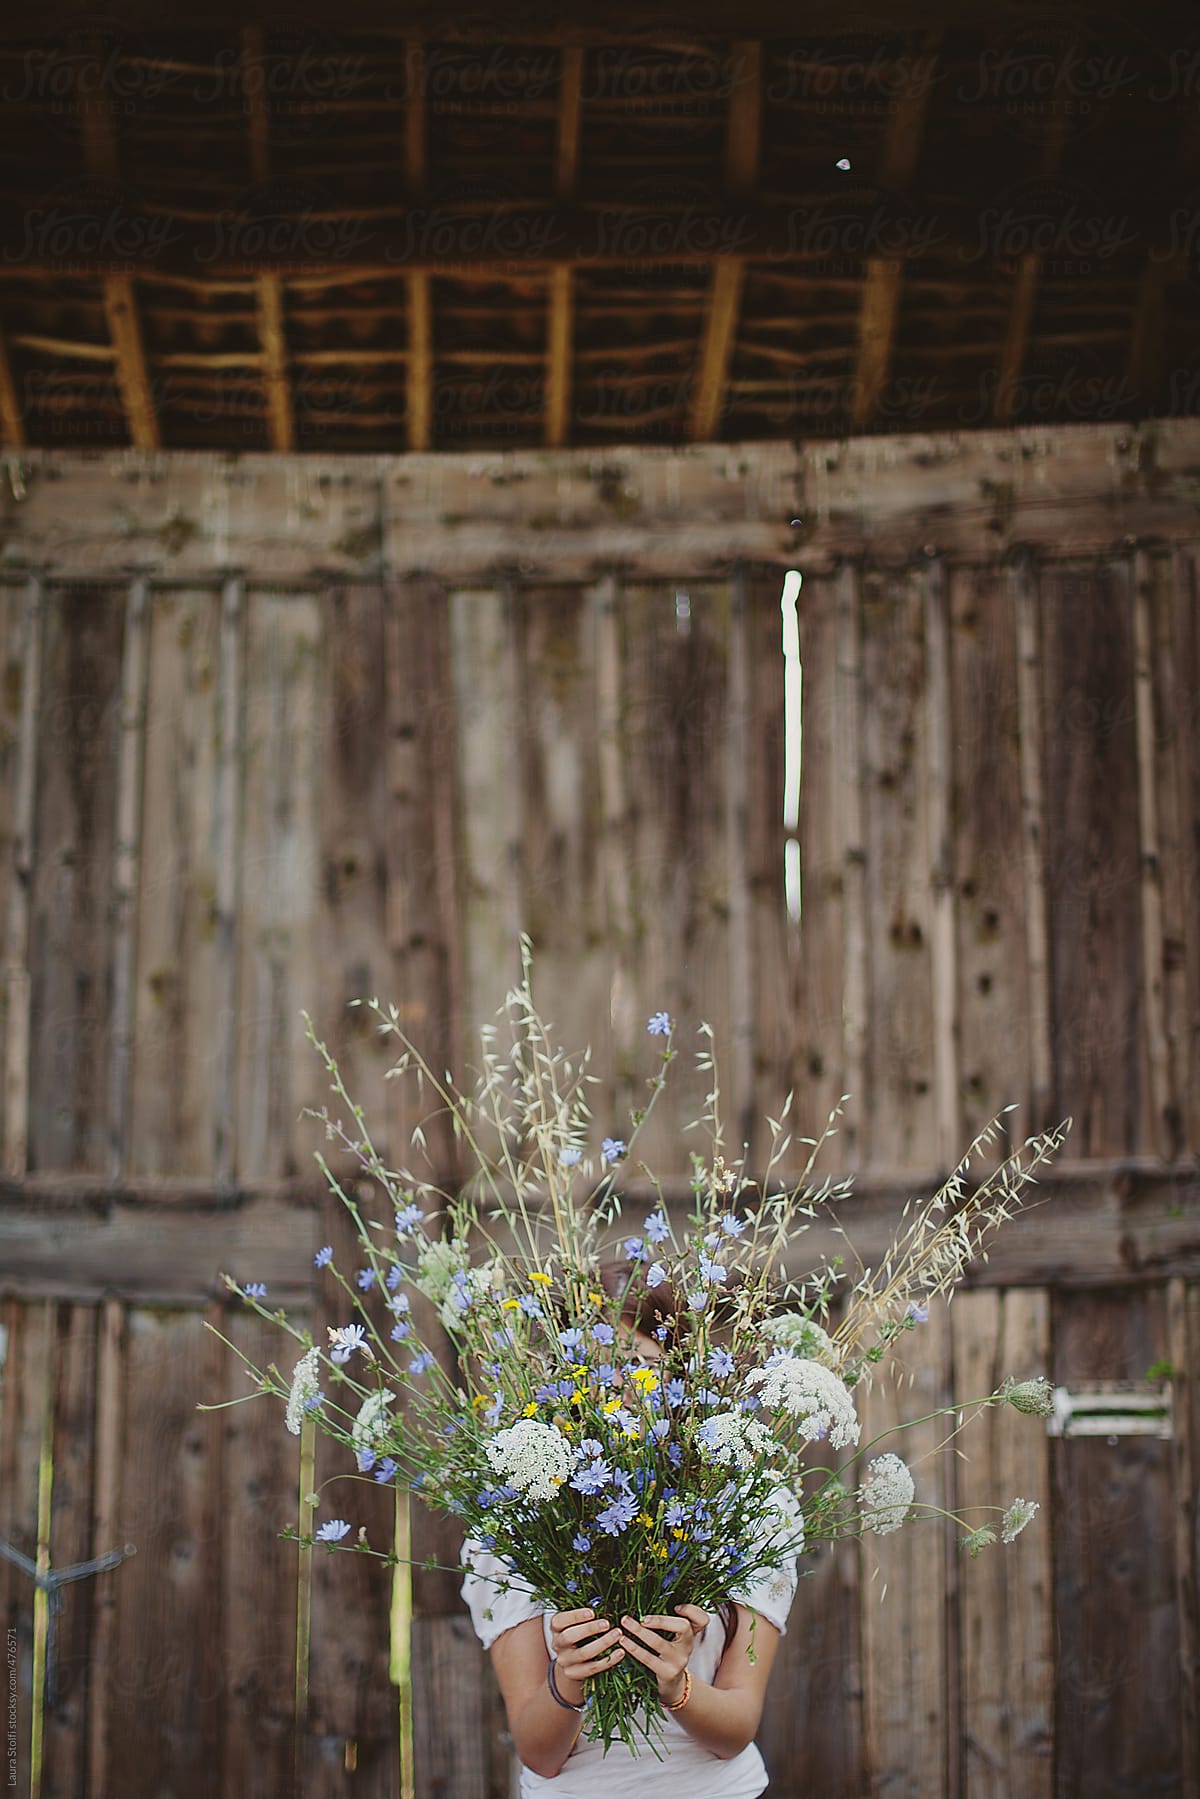 Woman hides her face behind flowers bouquet in front of old wooden door